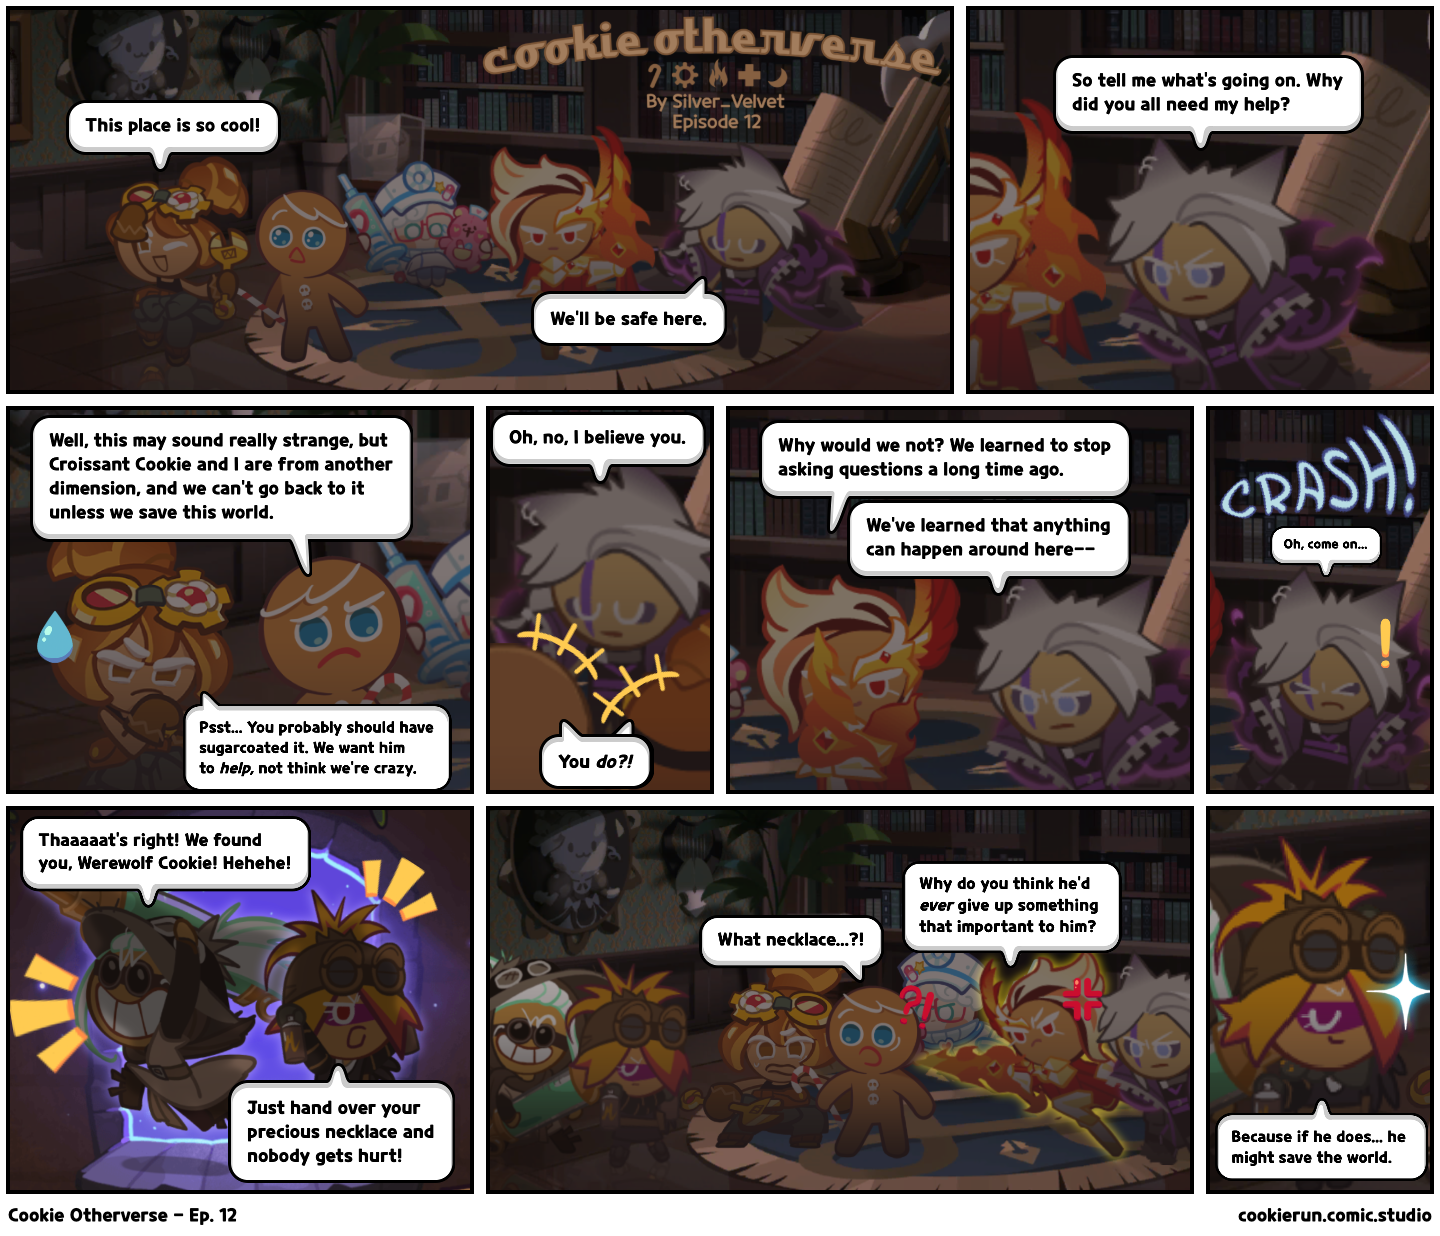 Cookie Otherverse - Ep. 12